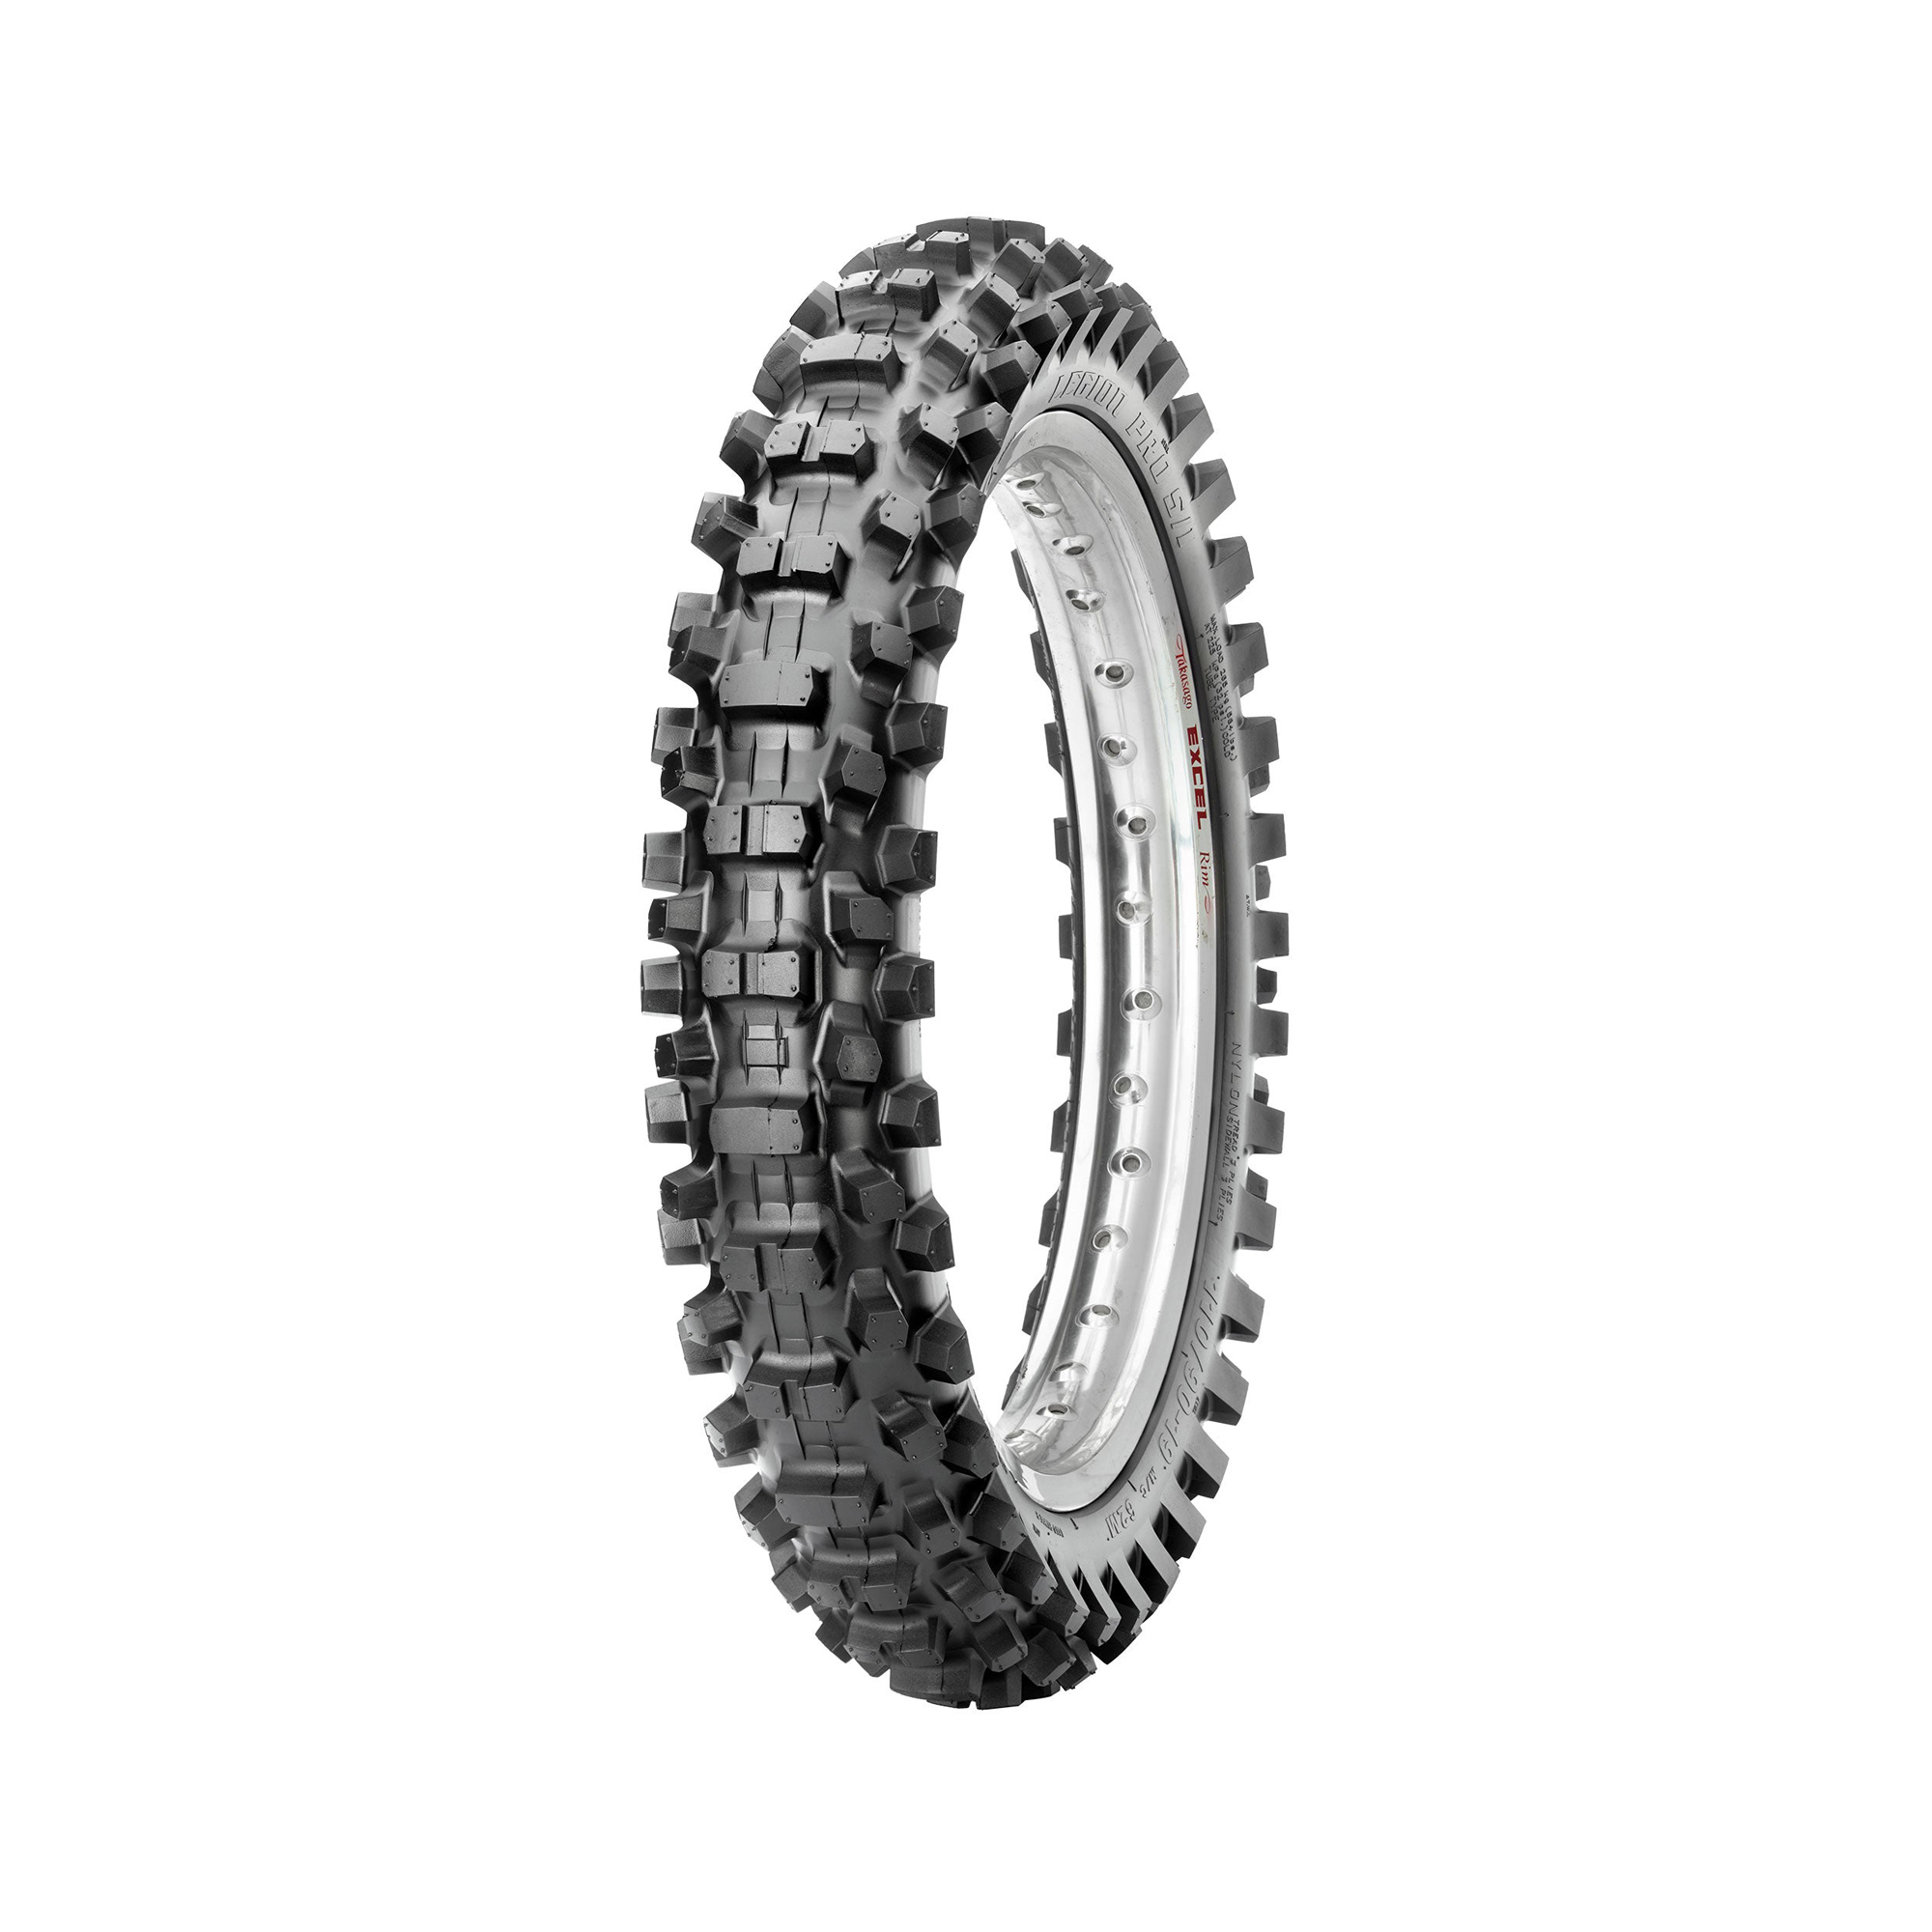 Legion Pro S/I off-road motorcycle tire